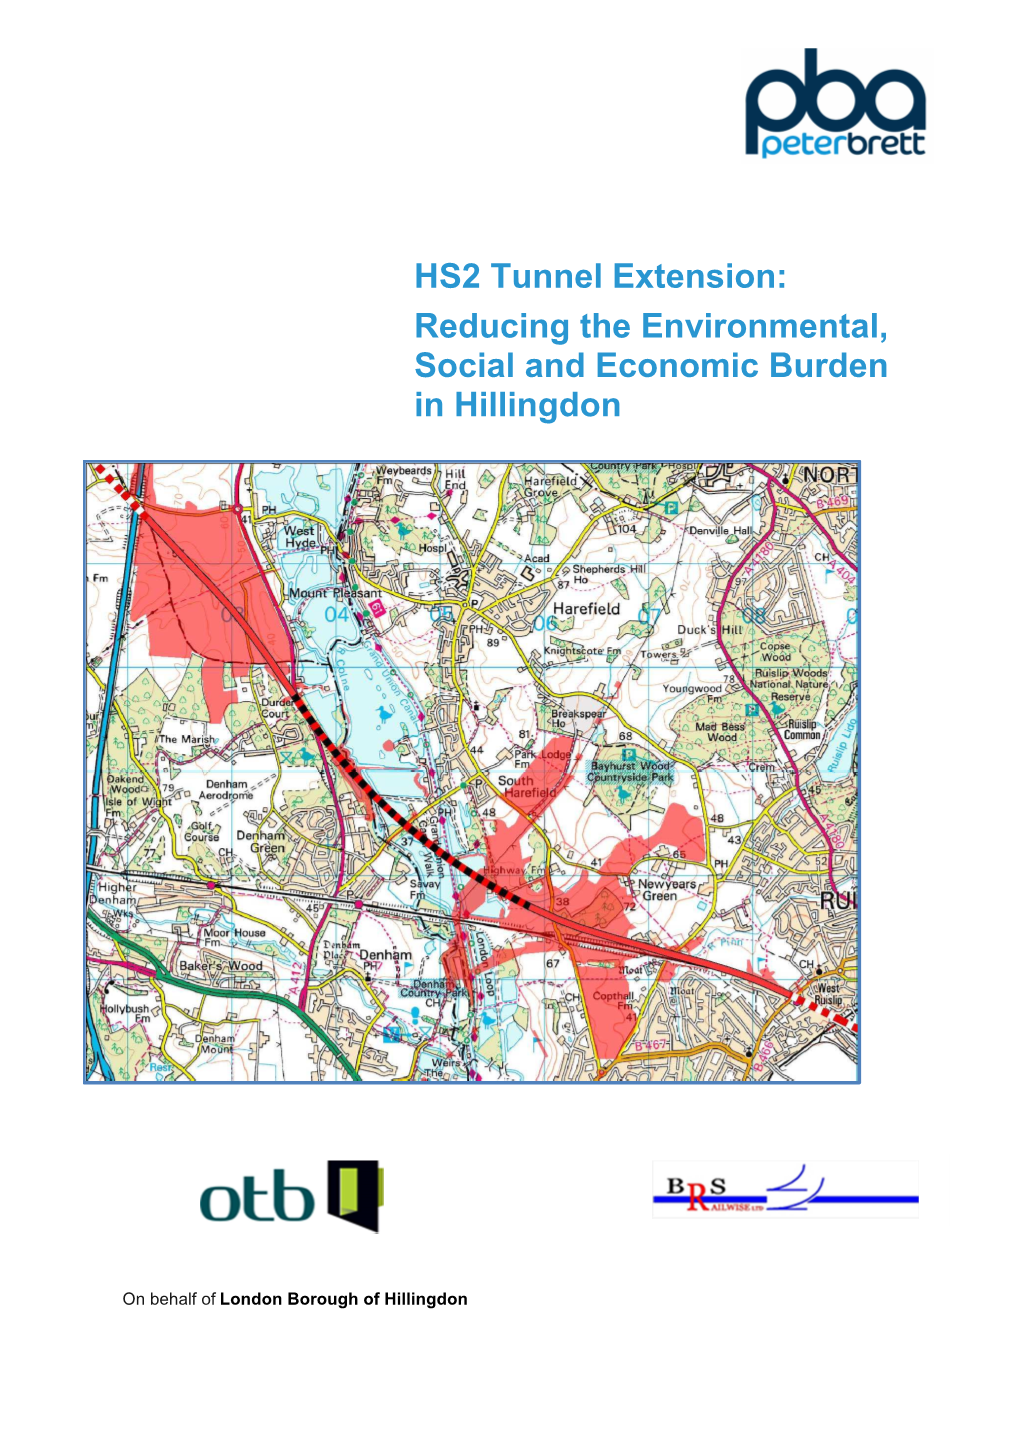 HS2 Tunnel Extension: Reducing the Environmental, Social and Economic Burden in Hillingdon